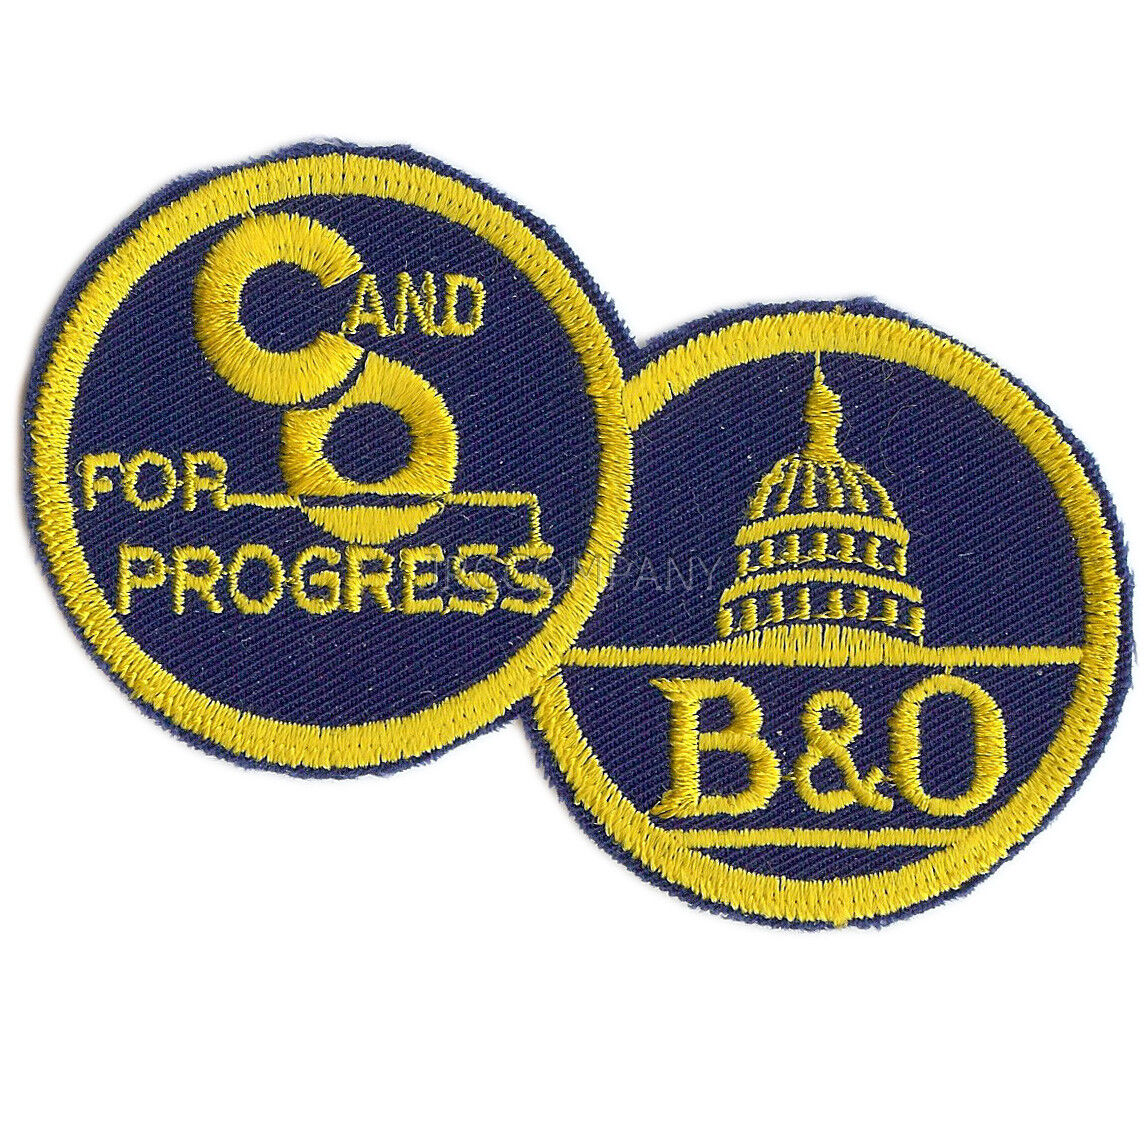 Patch- B&O/C&O Combo merger #11922 -NEW- 